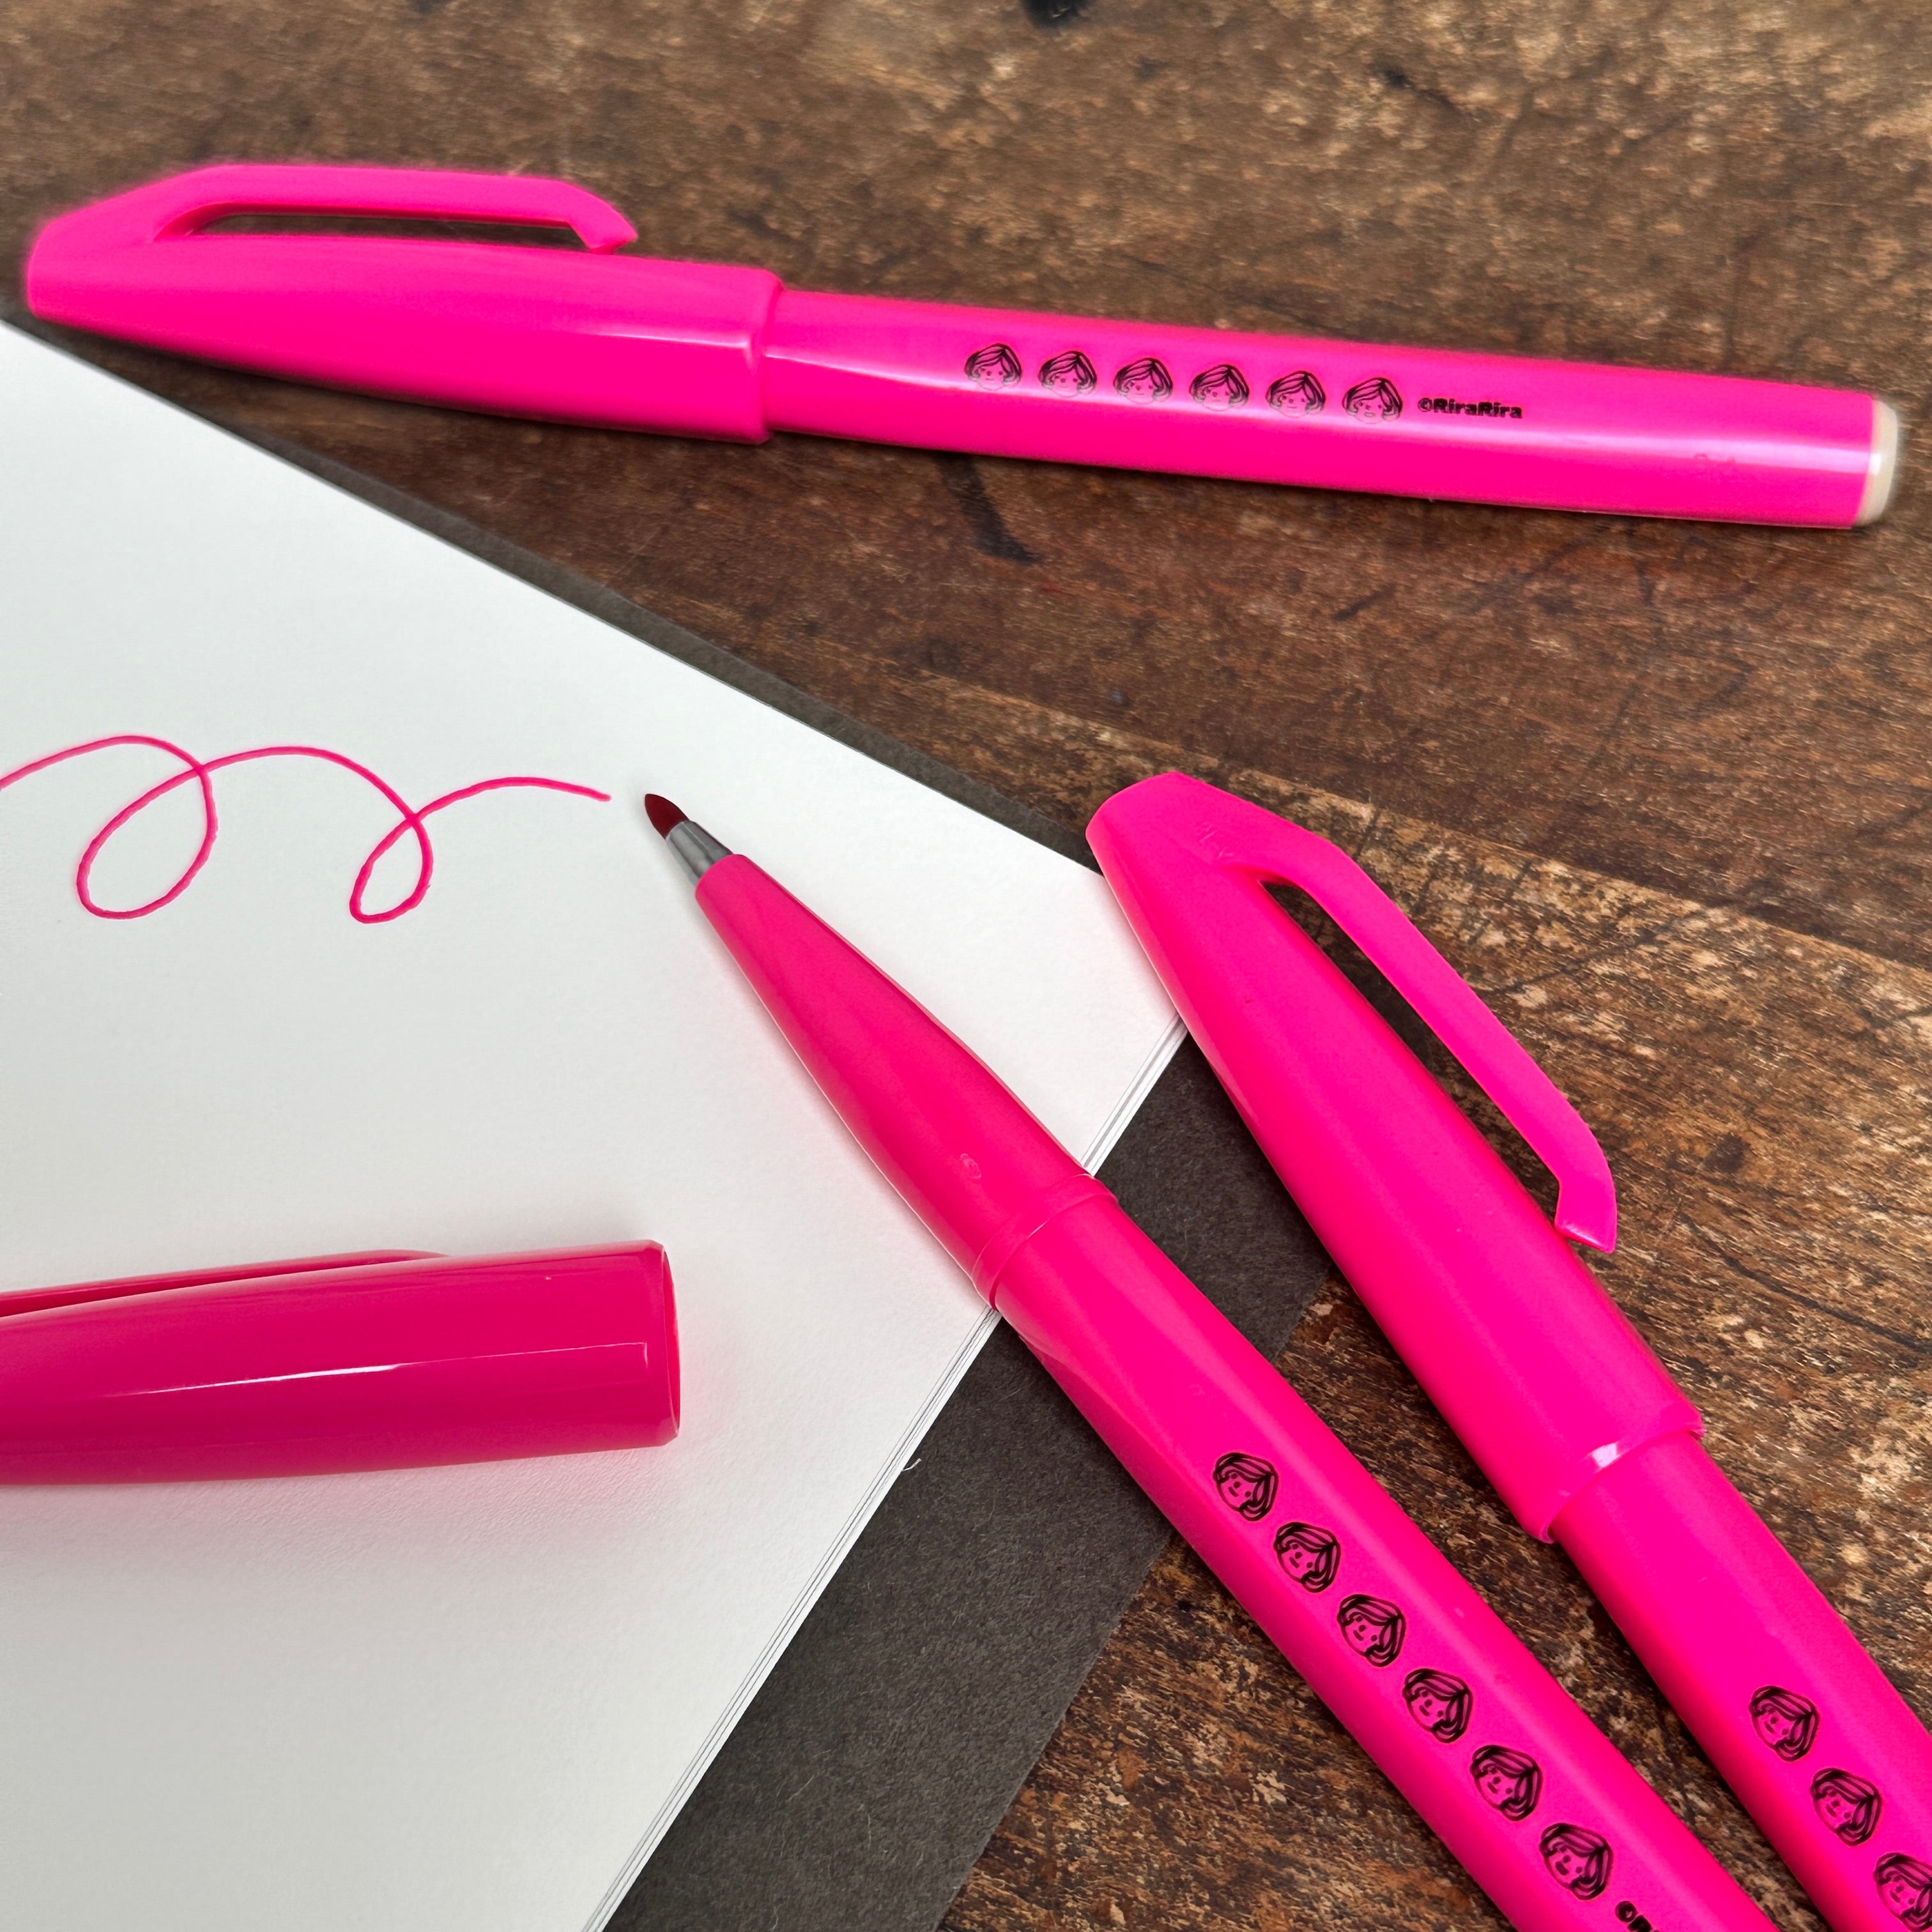 Maron-chan Pink Sign Pen